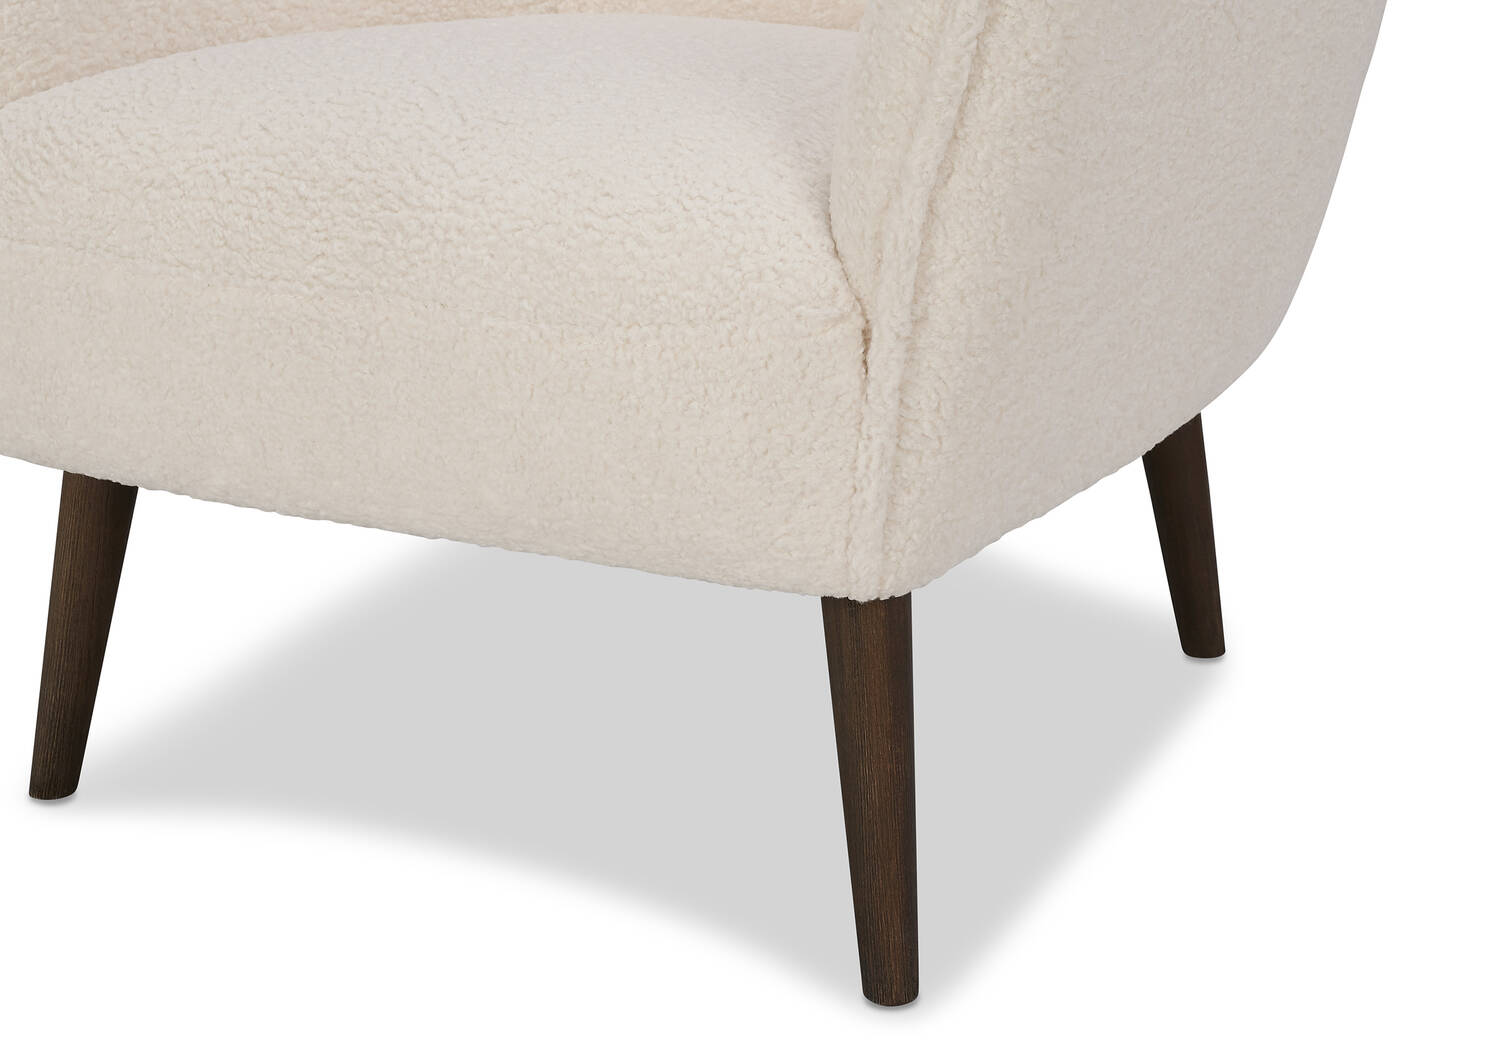 Dolly Armchair -Woolly Natural